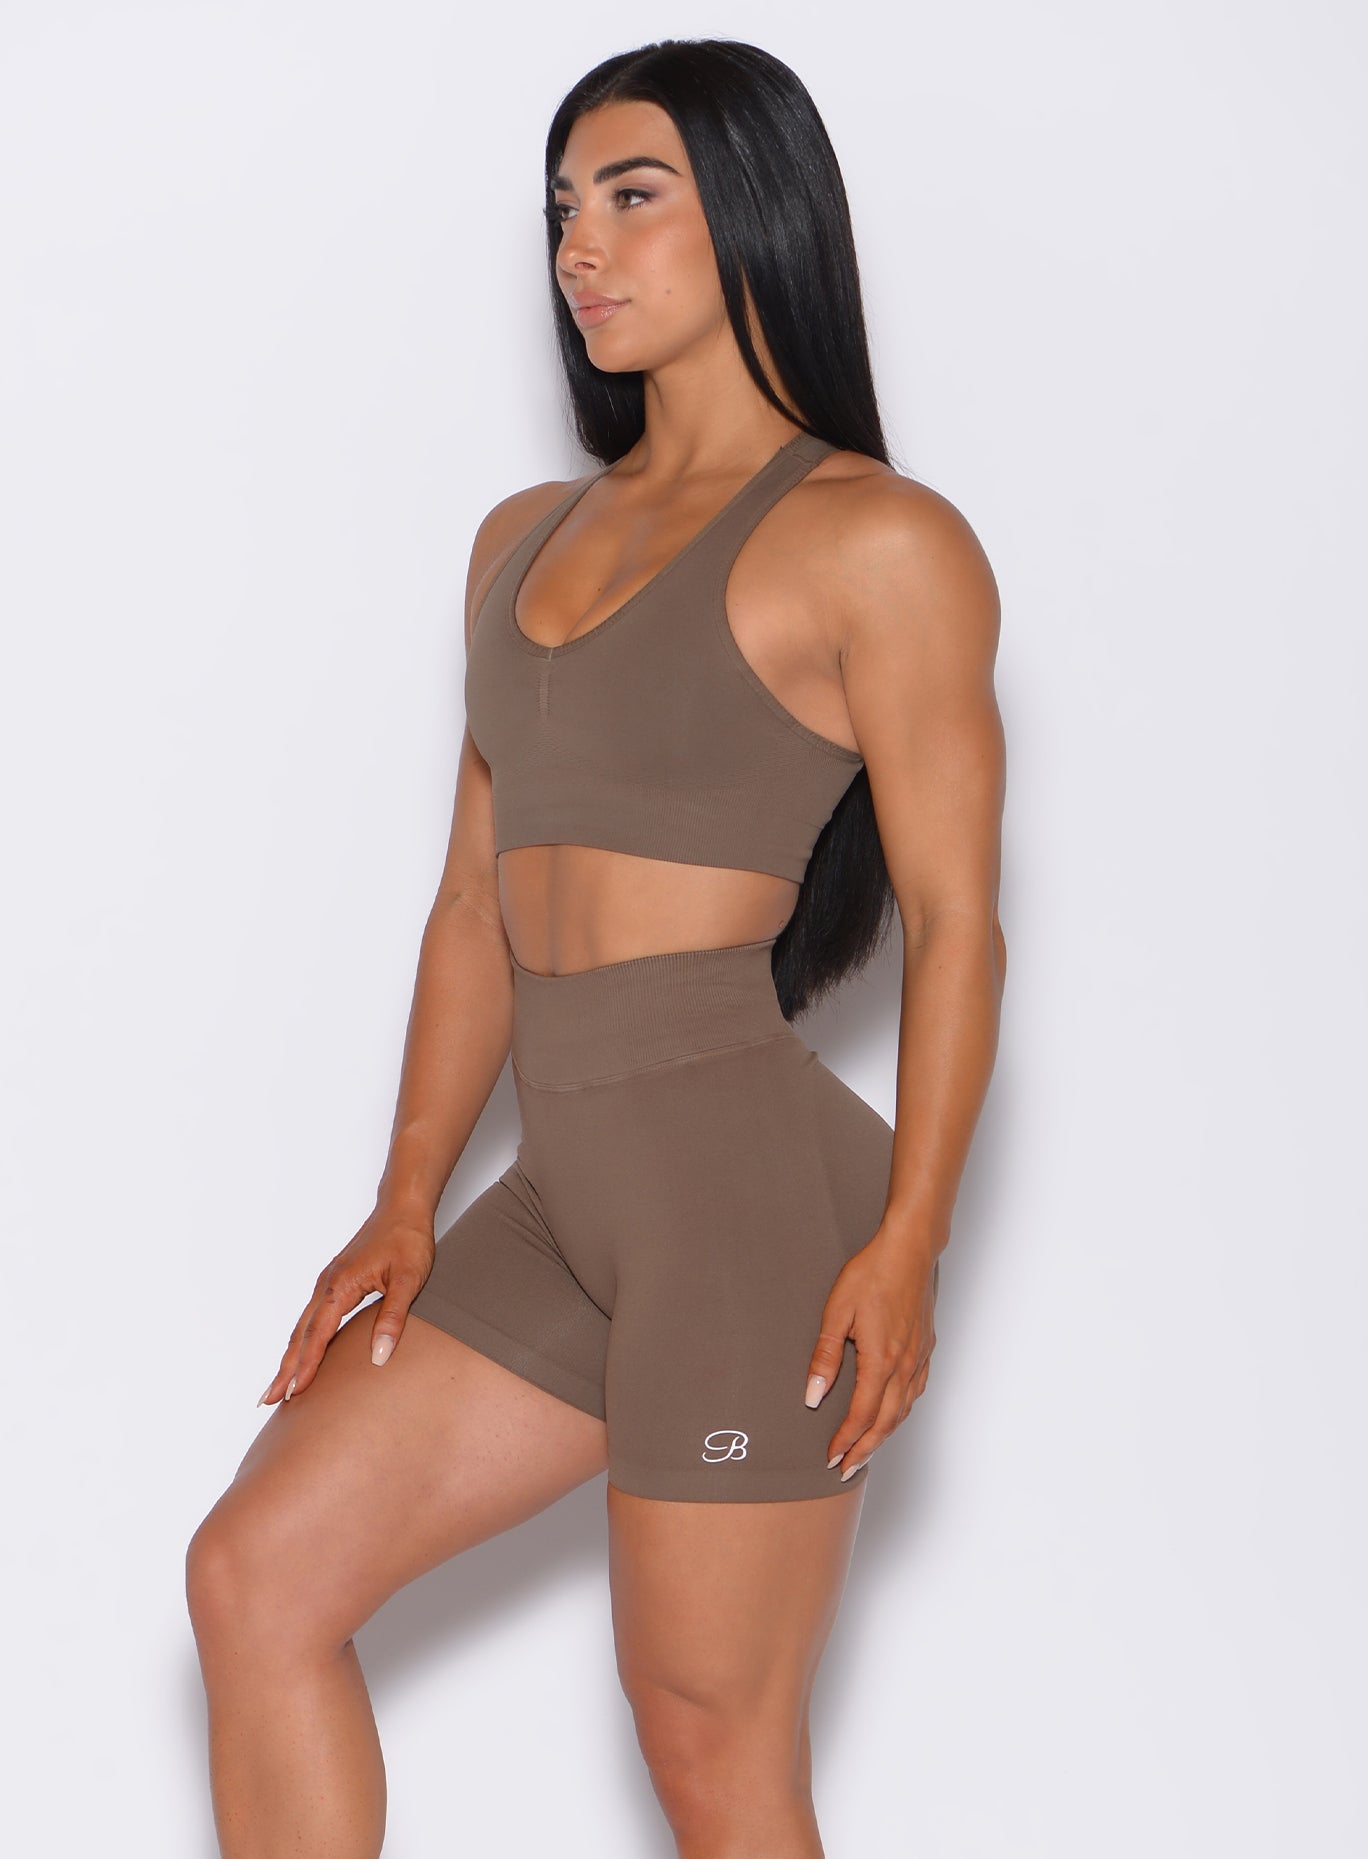 left side profile picture of a model angled slightly to her left wearing our smooth seamless bra in beachwood color along with the matching shorts